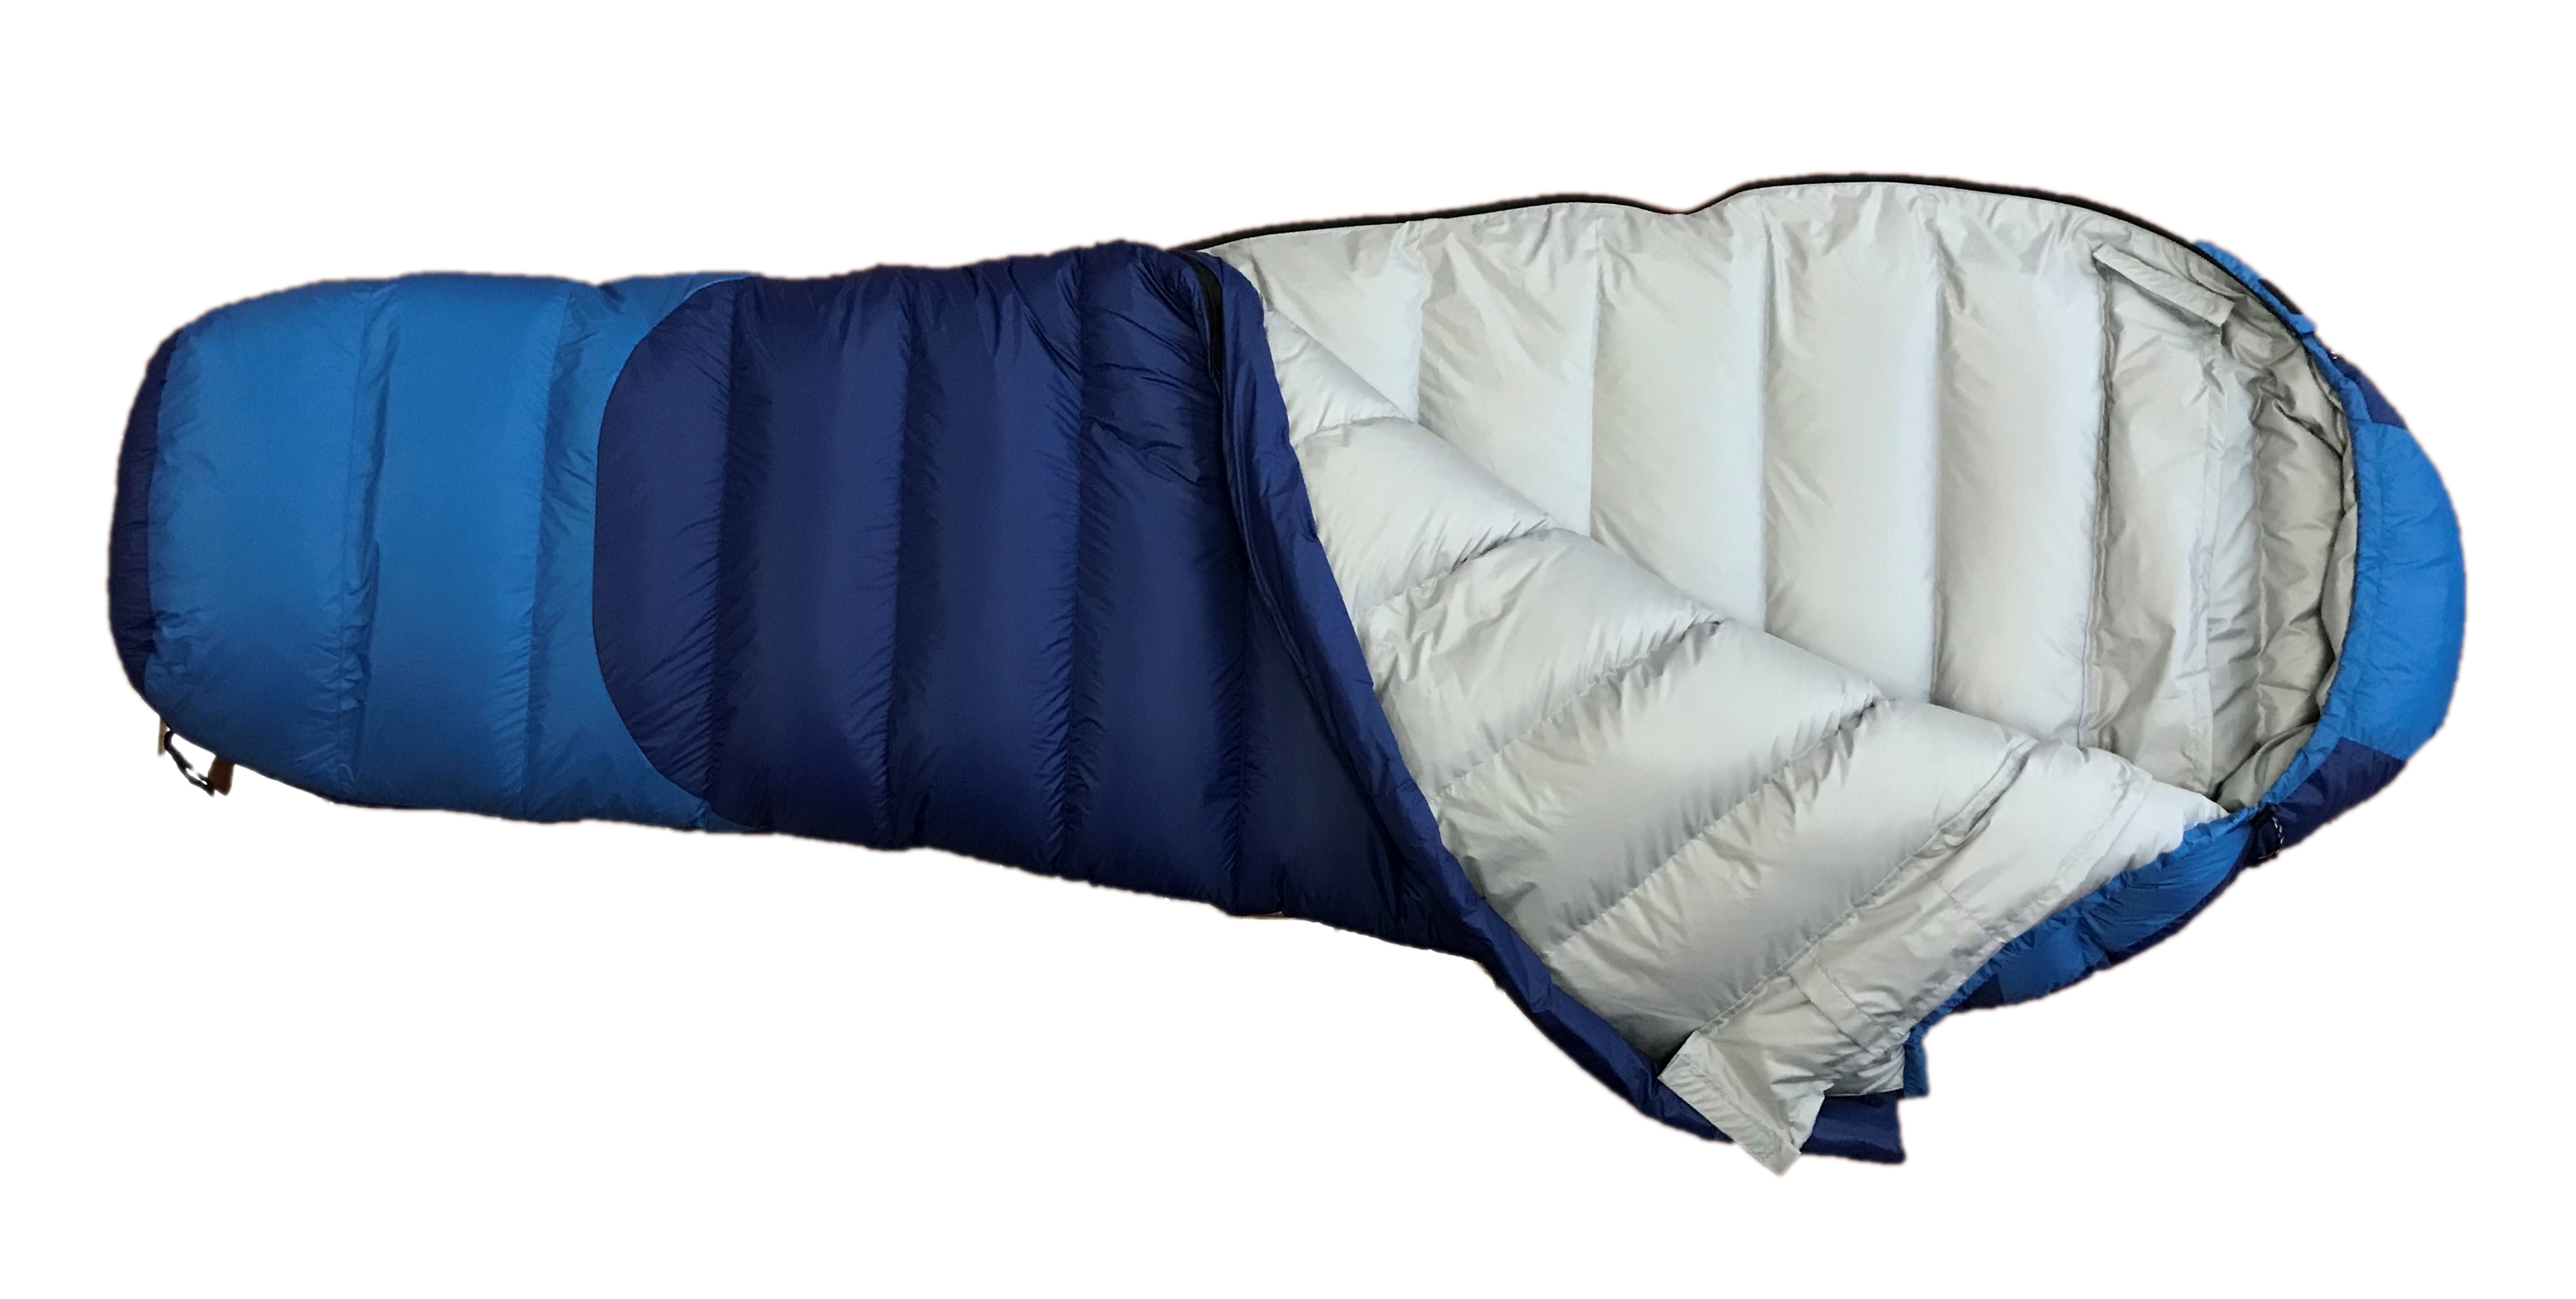 Down Sleeping Bags for Extreme Cold Weather 